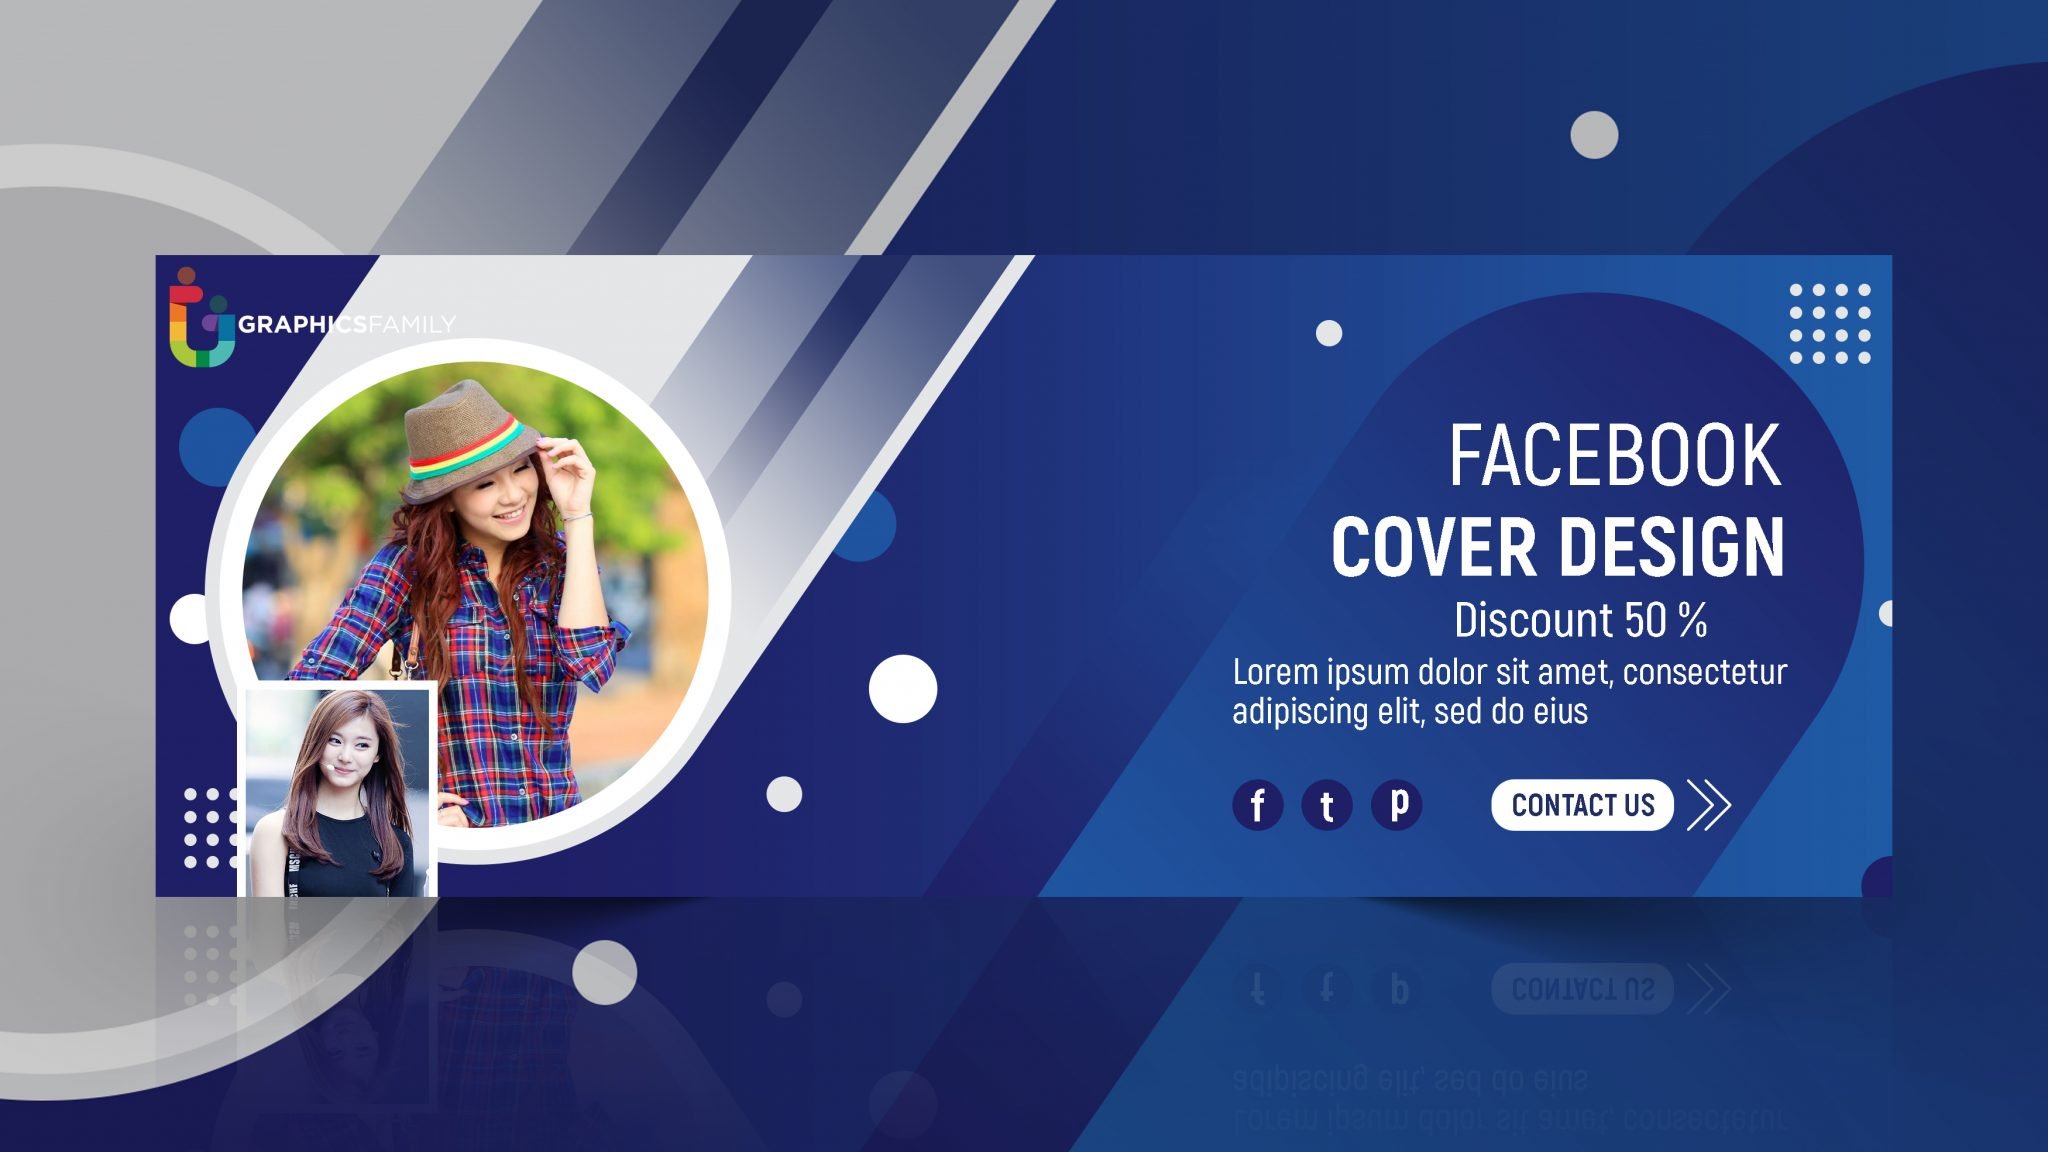 Abstract Facebook Cover Design Free psd Template GraphicsFamily